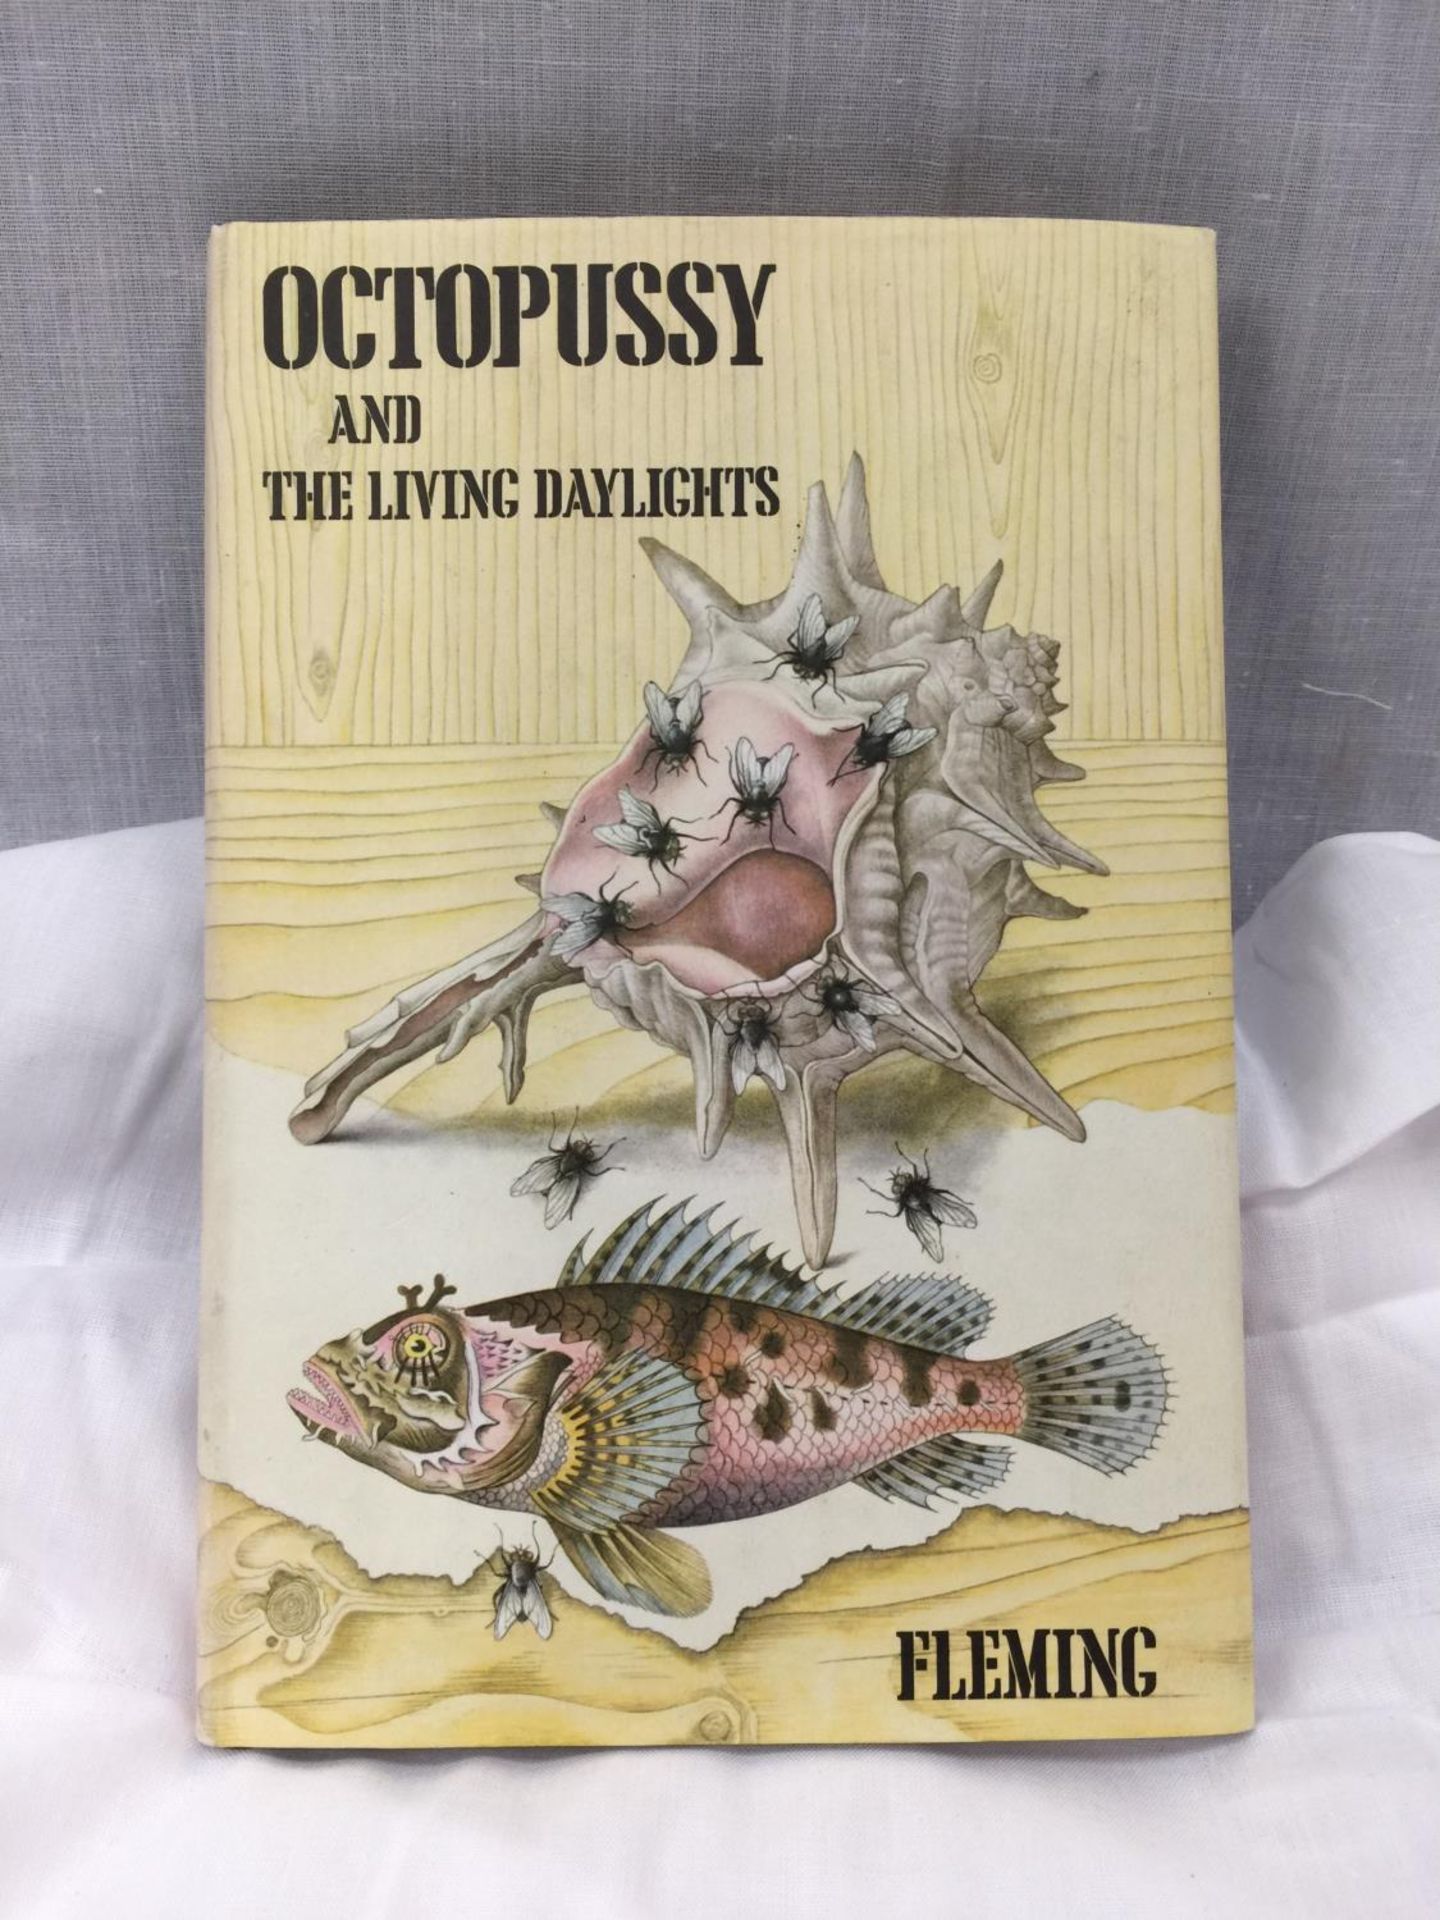 A FIRST EDITION JAMES BOND NOVEL - OCTOPUSSY AND THE LIVING DAYLIGHTS BY IAN FLEMING, HARDBACK